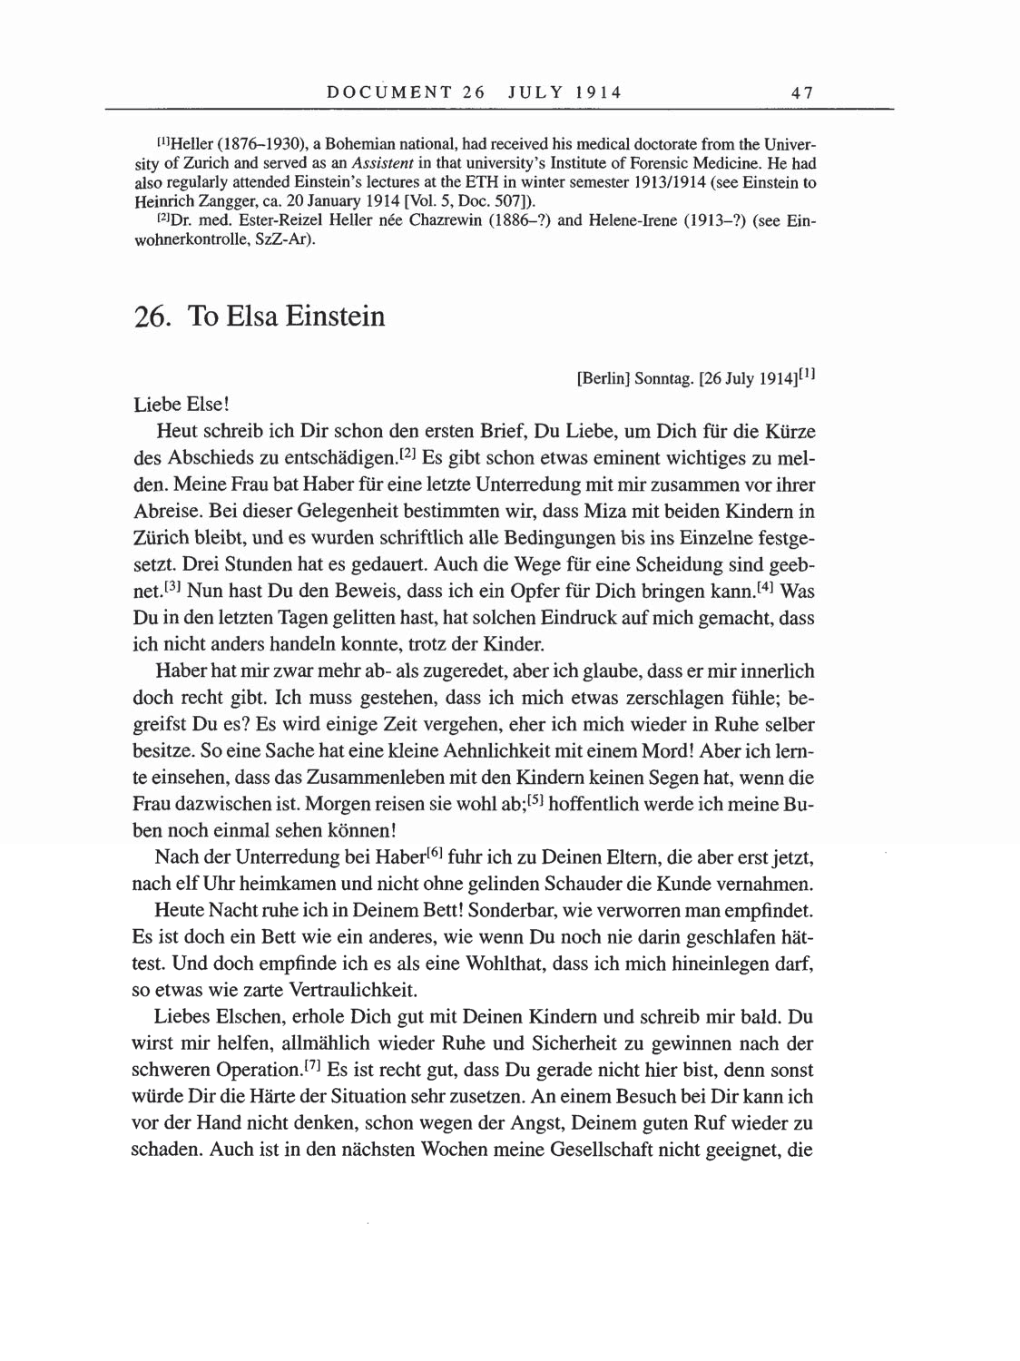 Volume 8, Part A: The Berlin Years: Correspondence 1914-1917 page 47